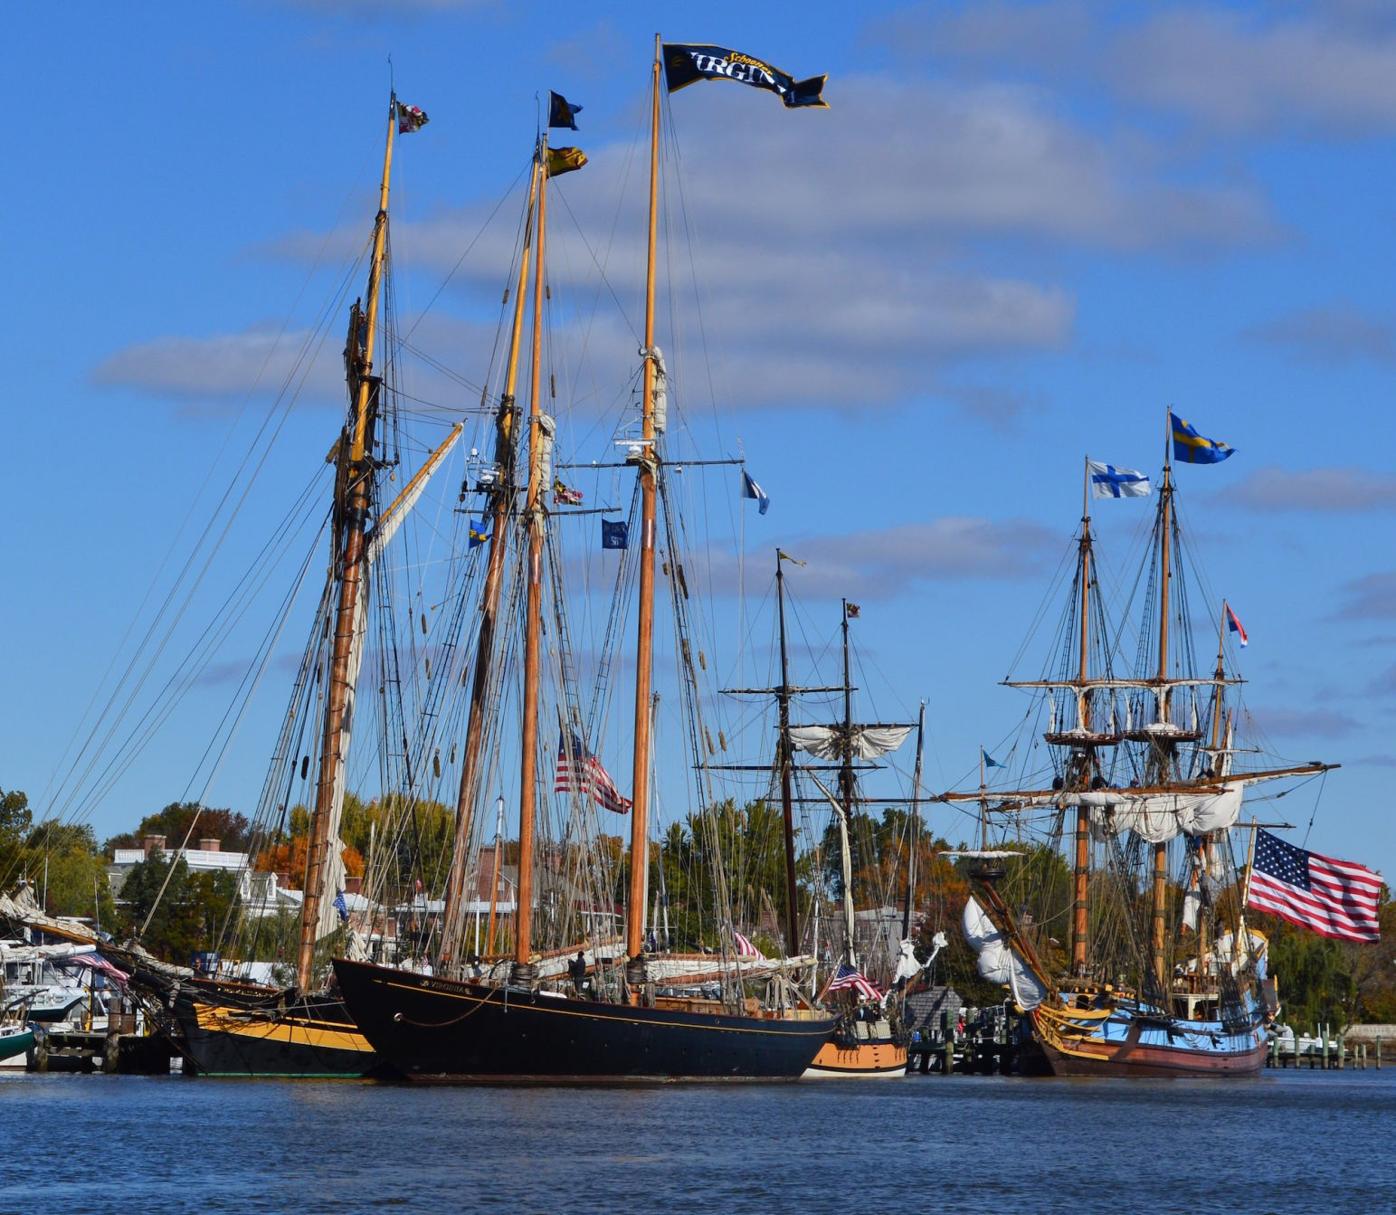 Tall ship festival coming to Chestertown Arts